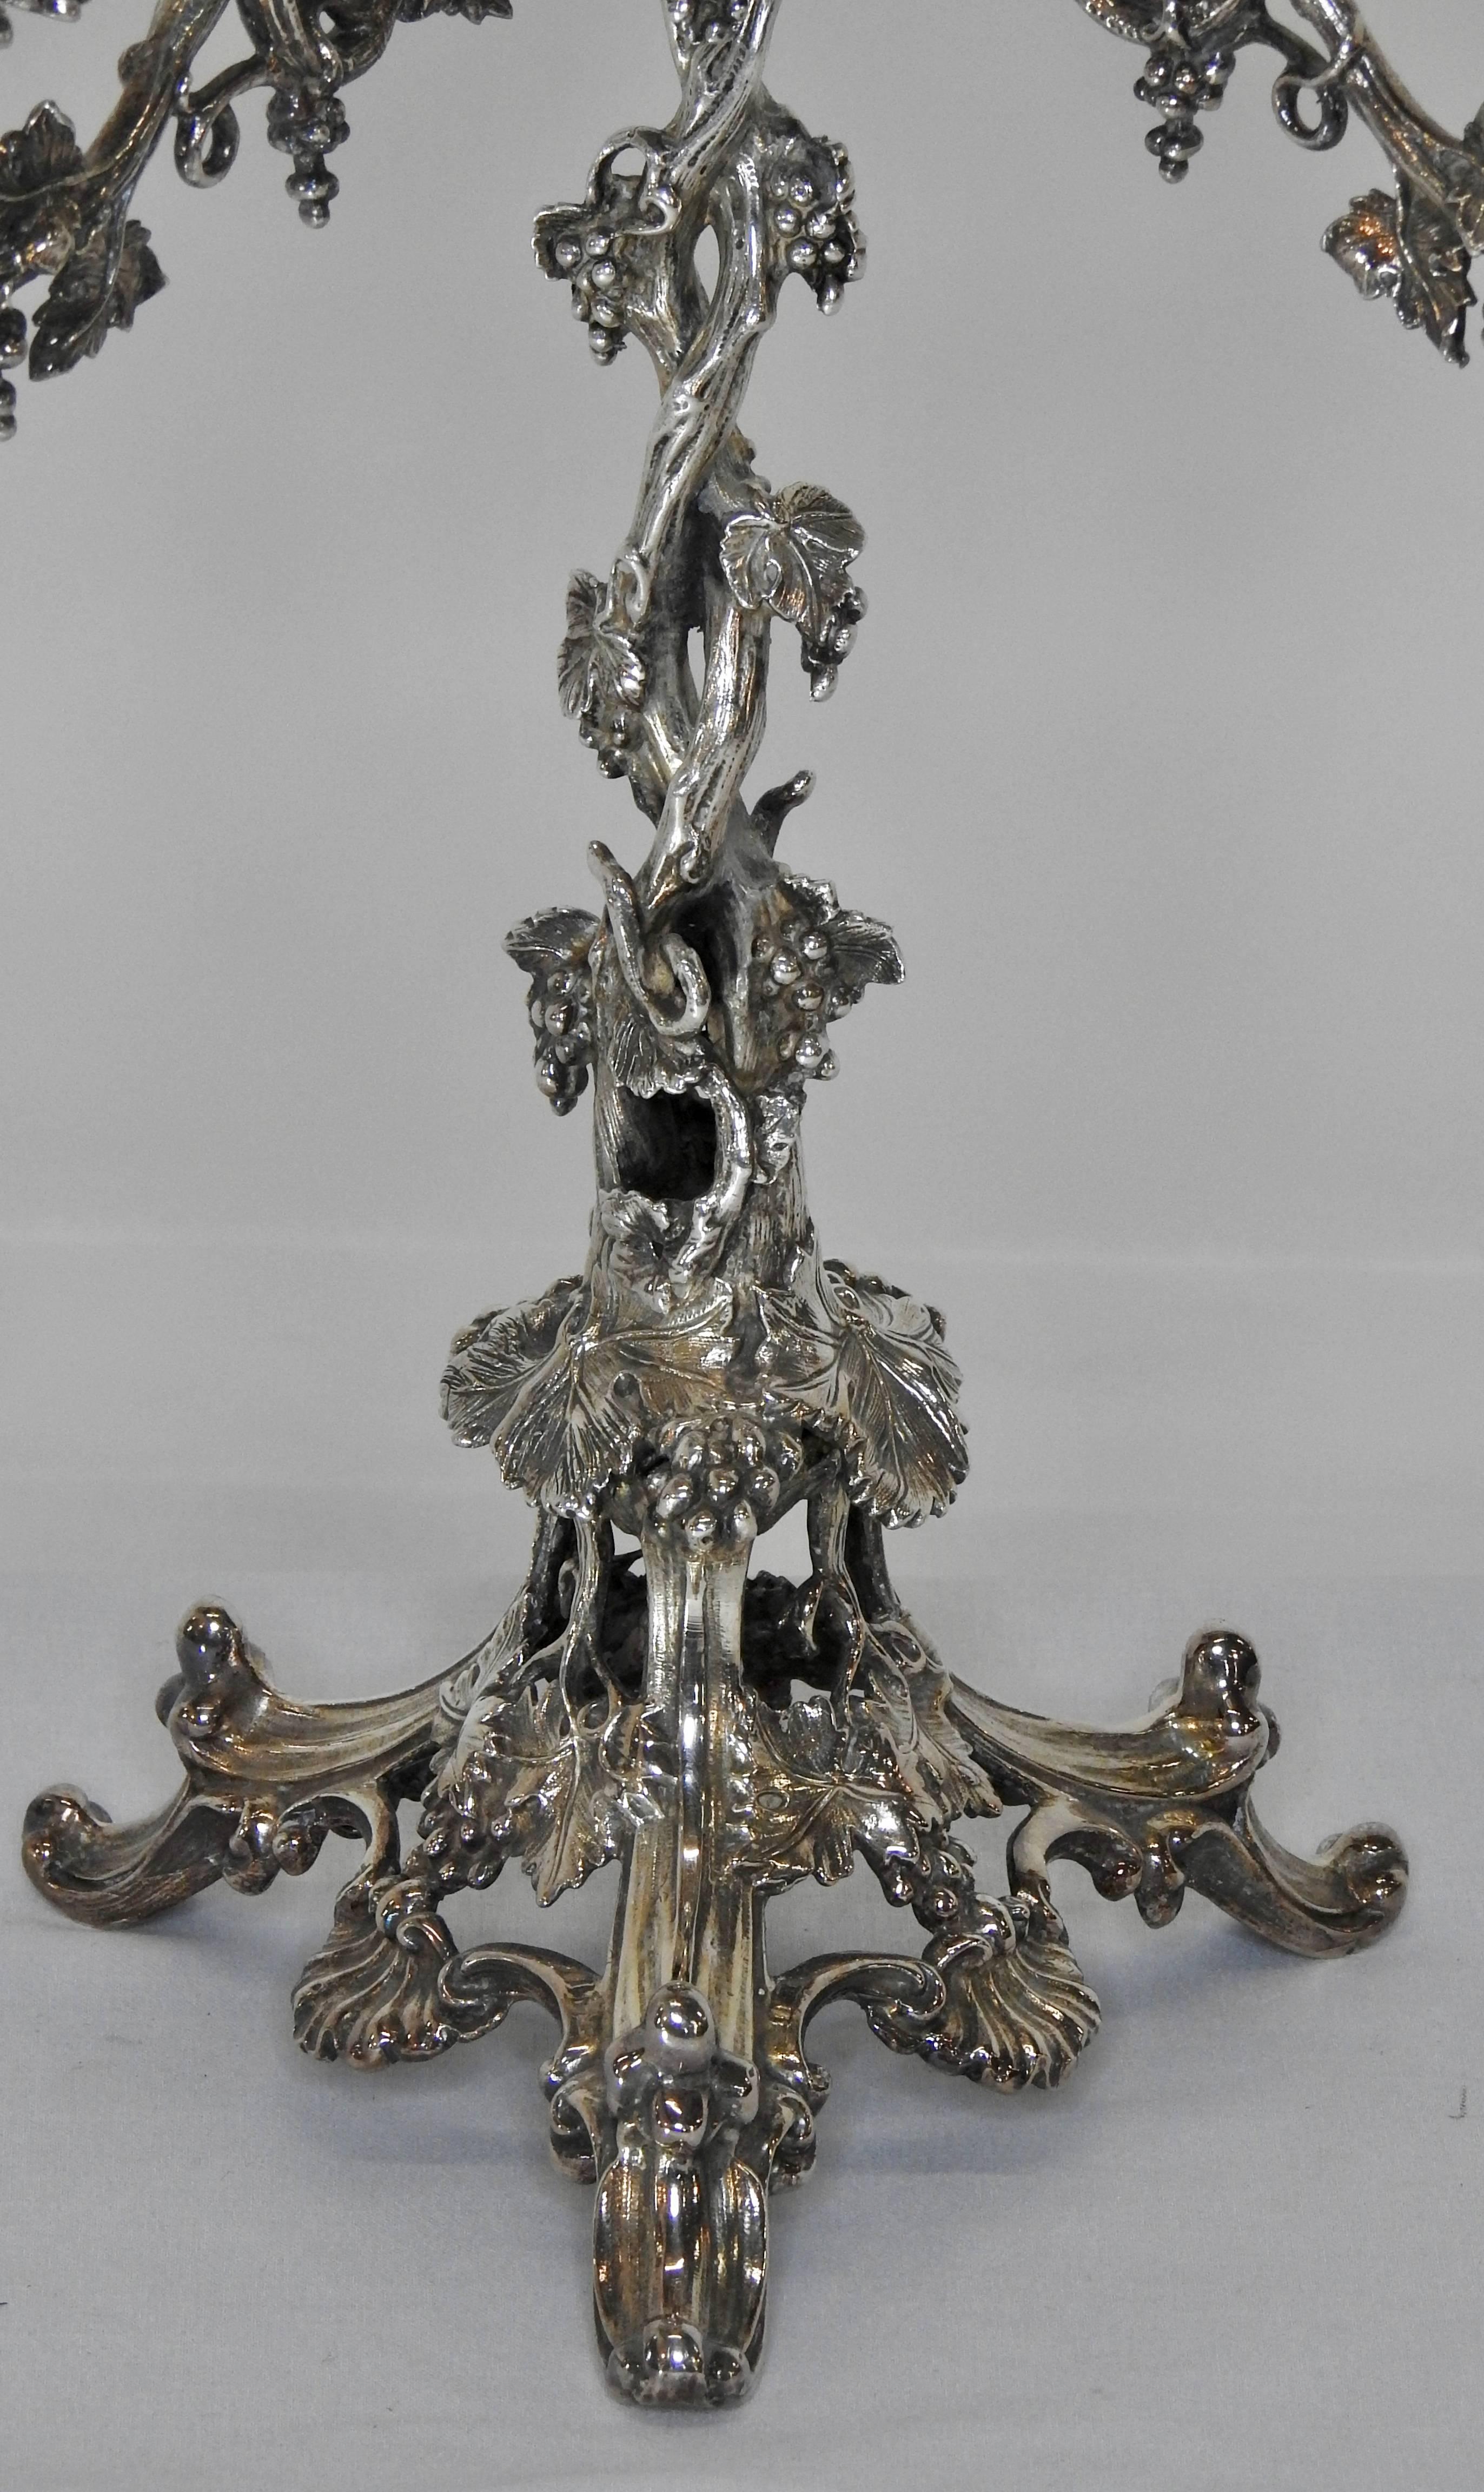 This is a stunning silver plate epergne with four removable arms and an engraved glass bowl. Three ornate feet lead up to vines that twine upward to that arms. The vines twist and go out the arms. From the arms it leads upward to the fluted shape up